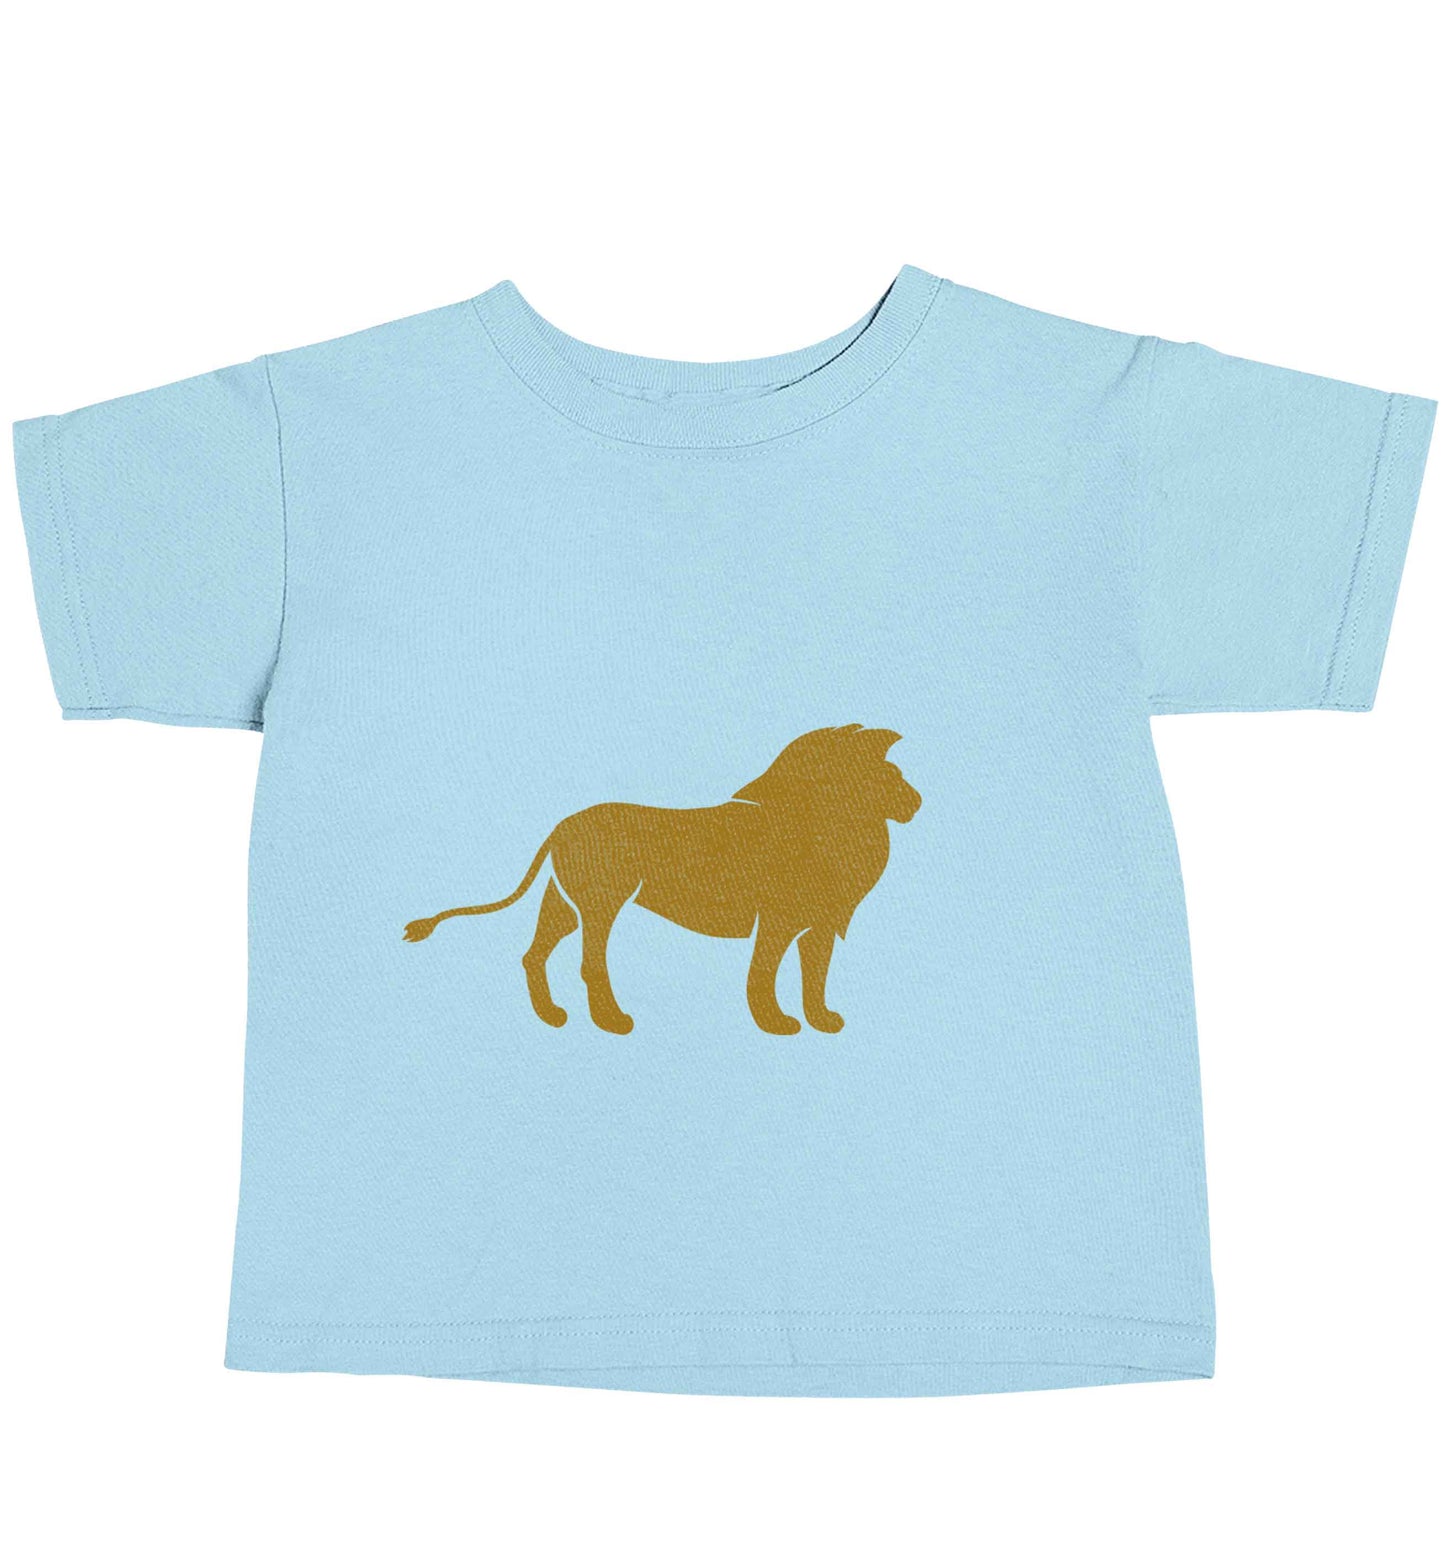 Gold lion light blue baby toddler Tshirt 2 Years